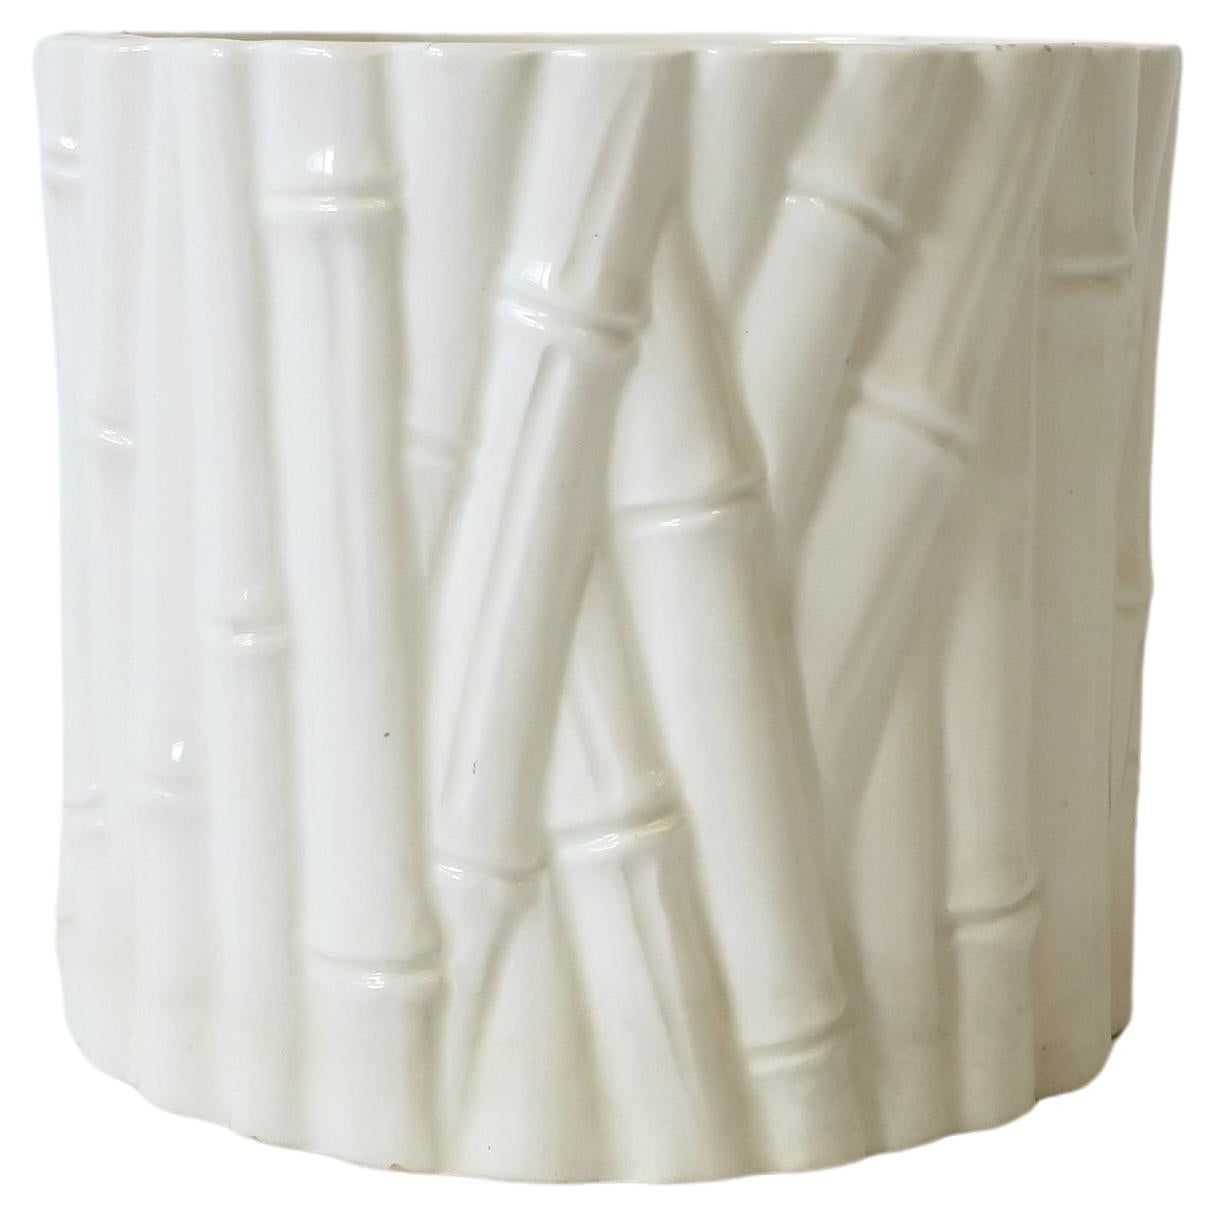 White Ceramic Cachepot or Jardiniere with Bamboo Design